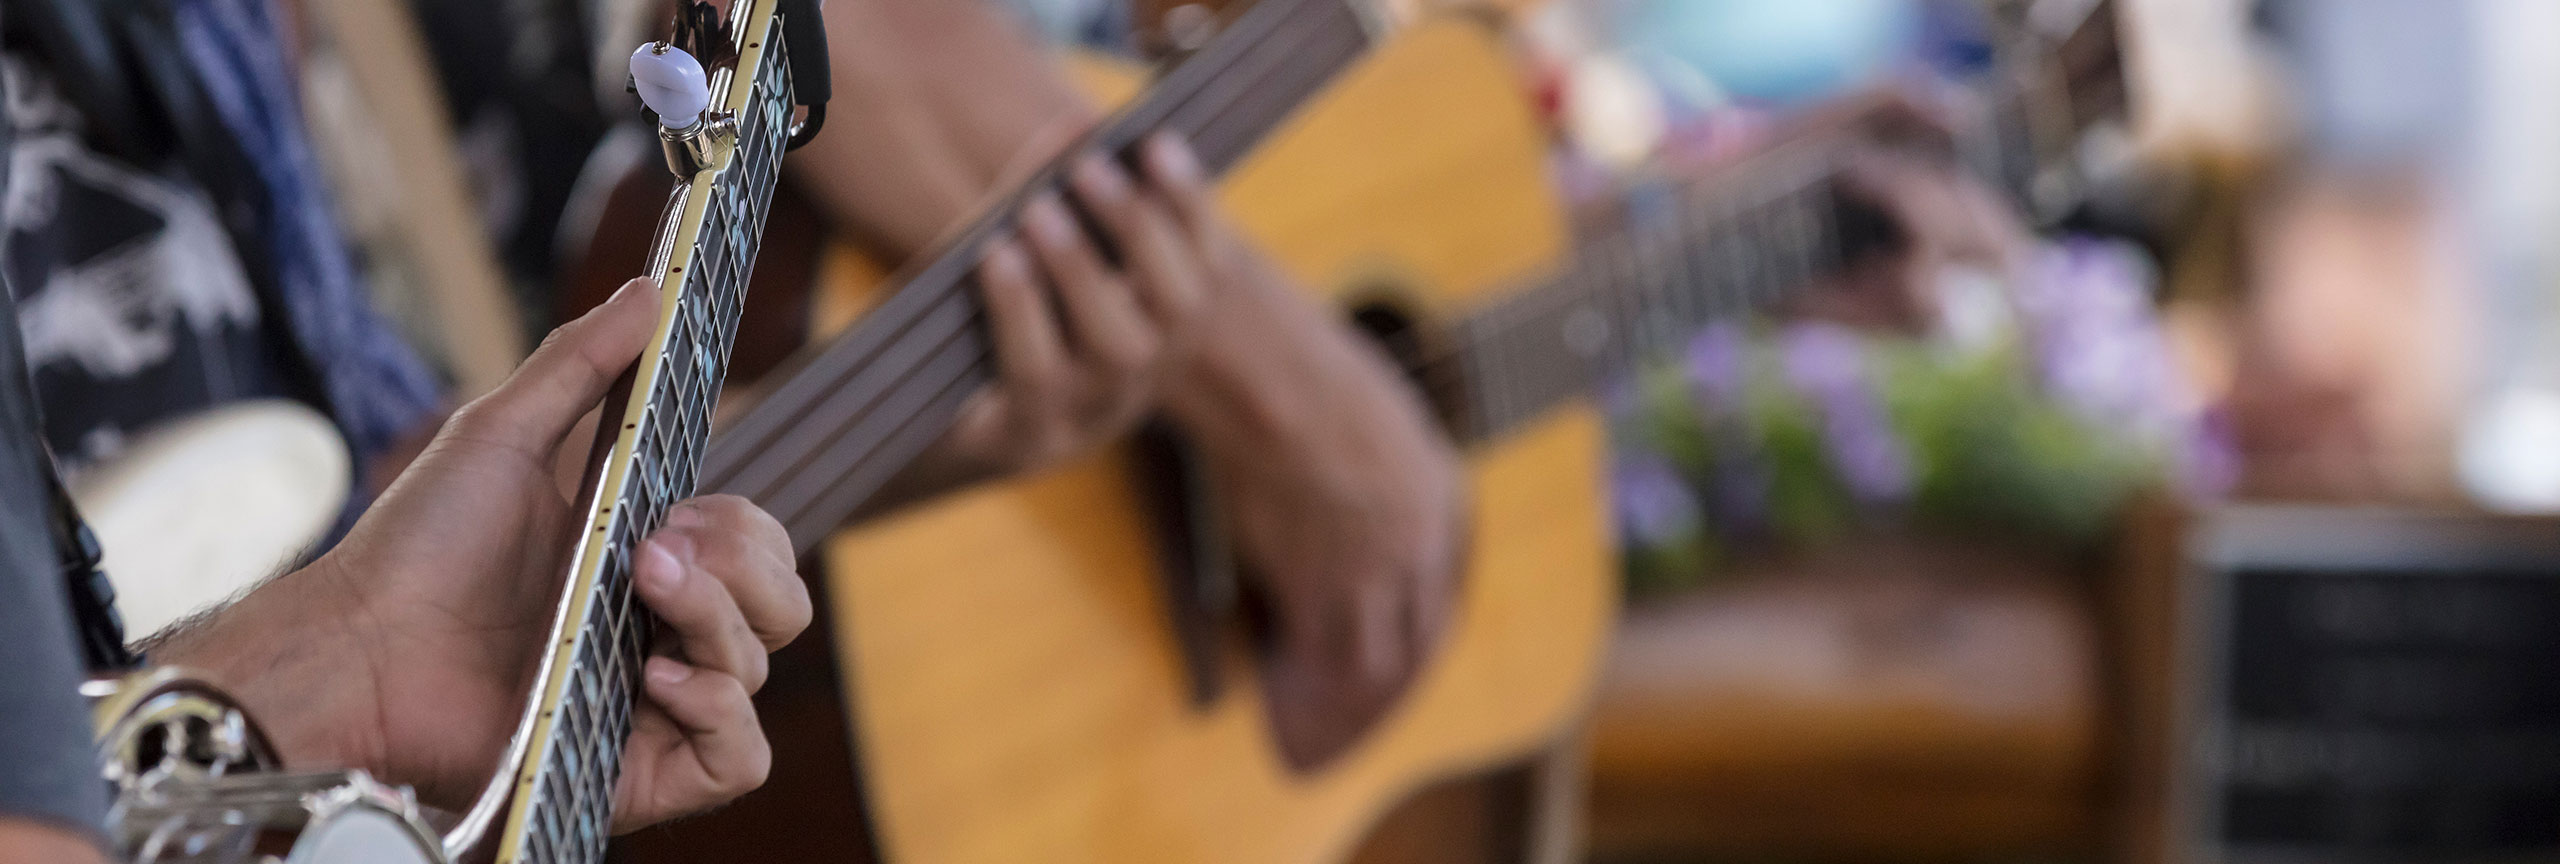 Closeup of two people playing guitars.